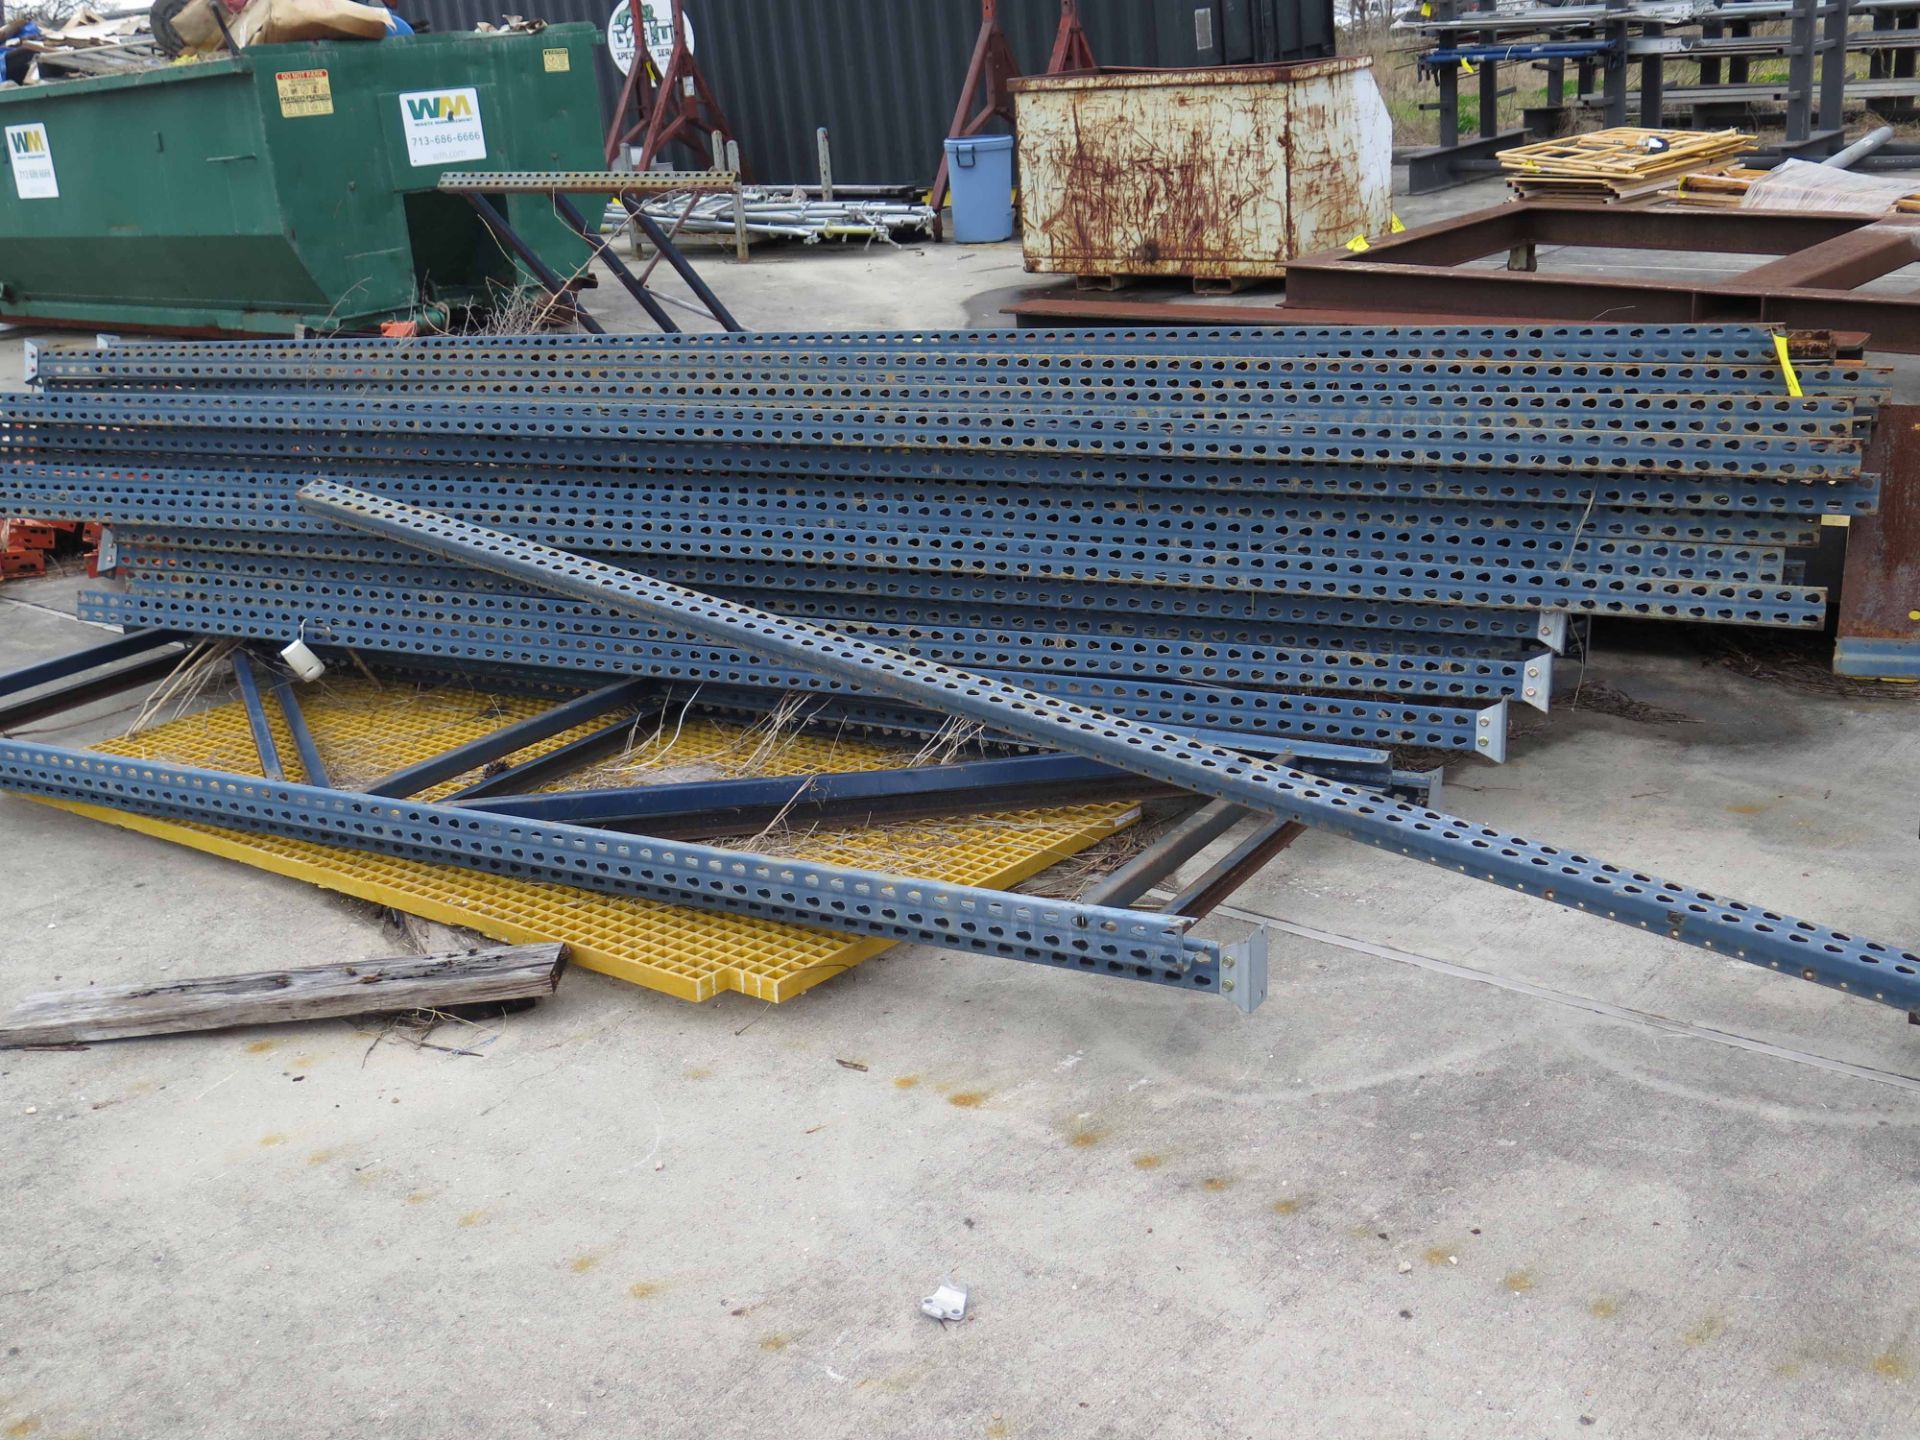 LOT CONSISTING OF: pallet rack uprights & cross arms (add'l. cross arms are located on top of Lot - Image 2 of 5